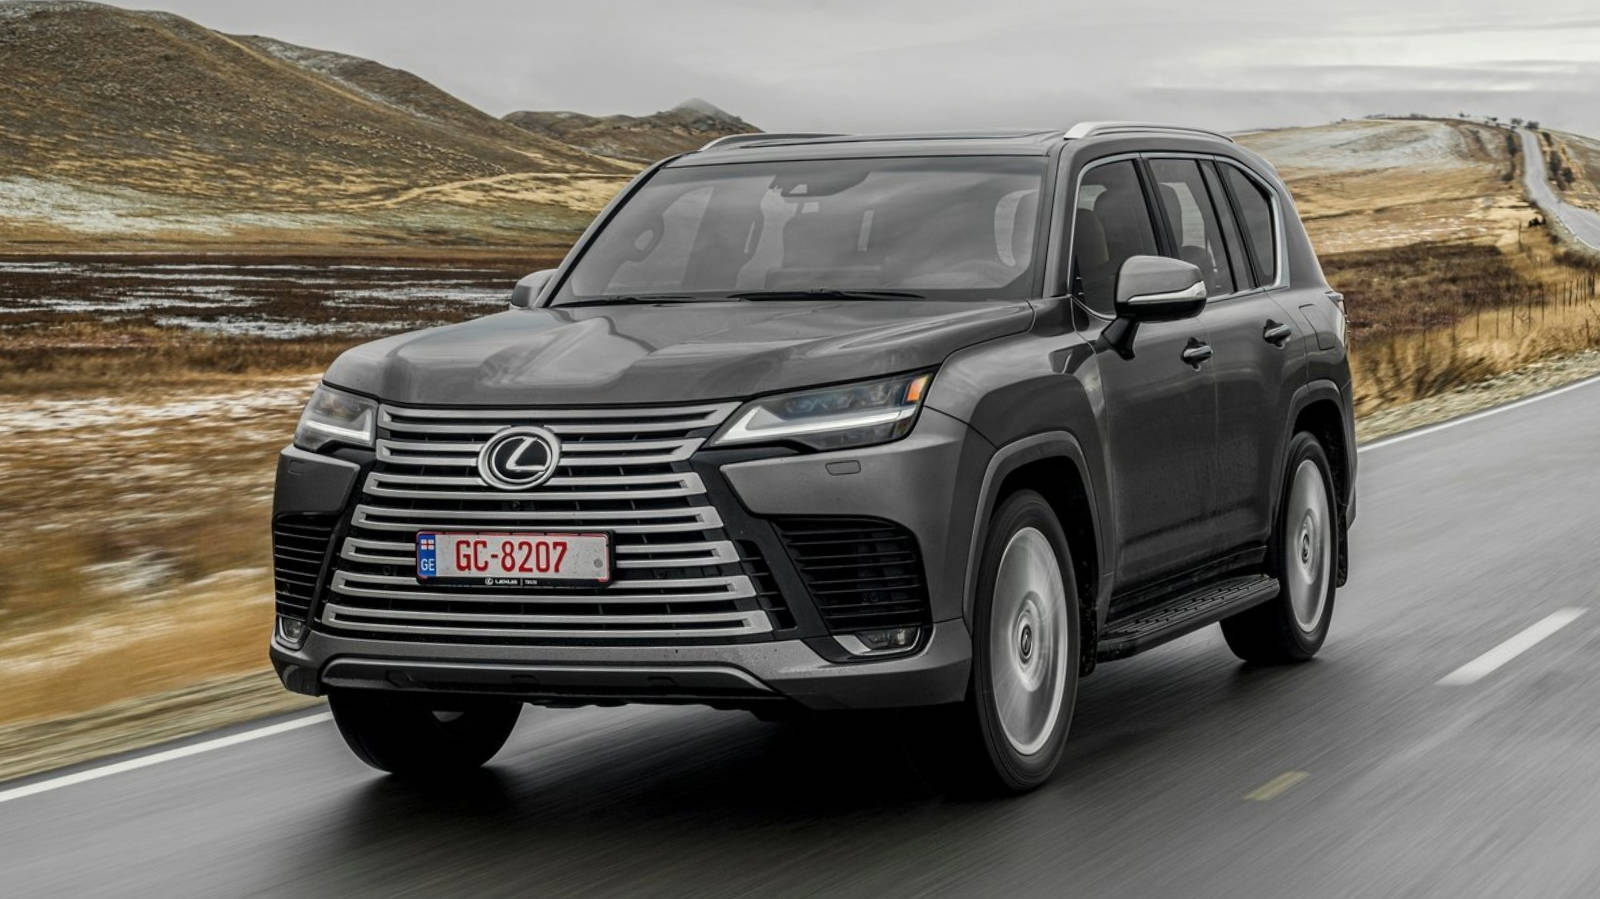 Lexus LX600 Review — Meticulously Crafted Luxury SUV